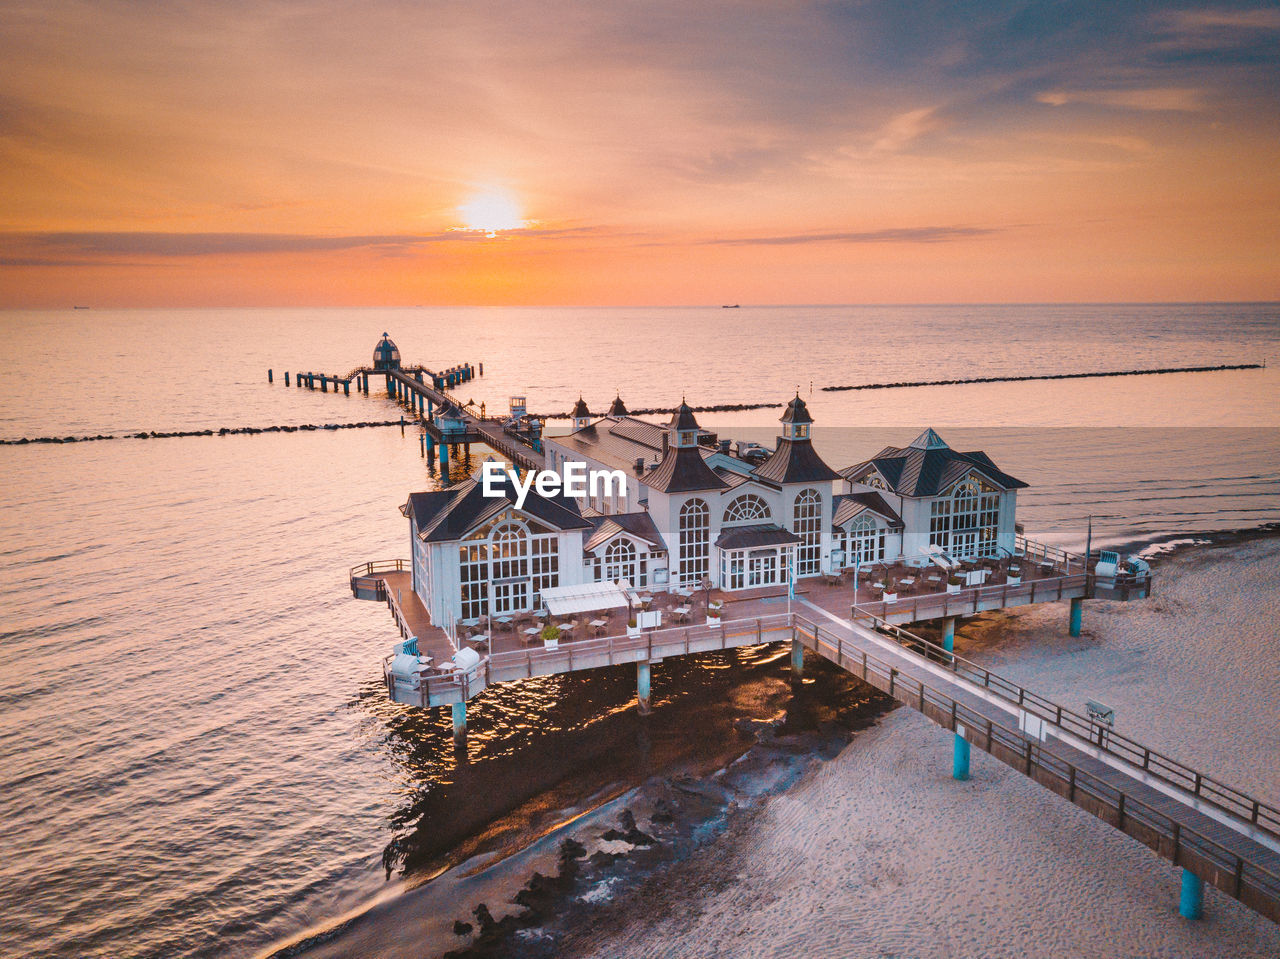 Drone view of stilt houses on pier over sea against sky during suset